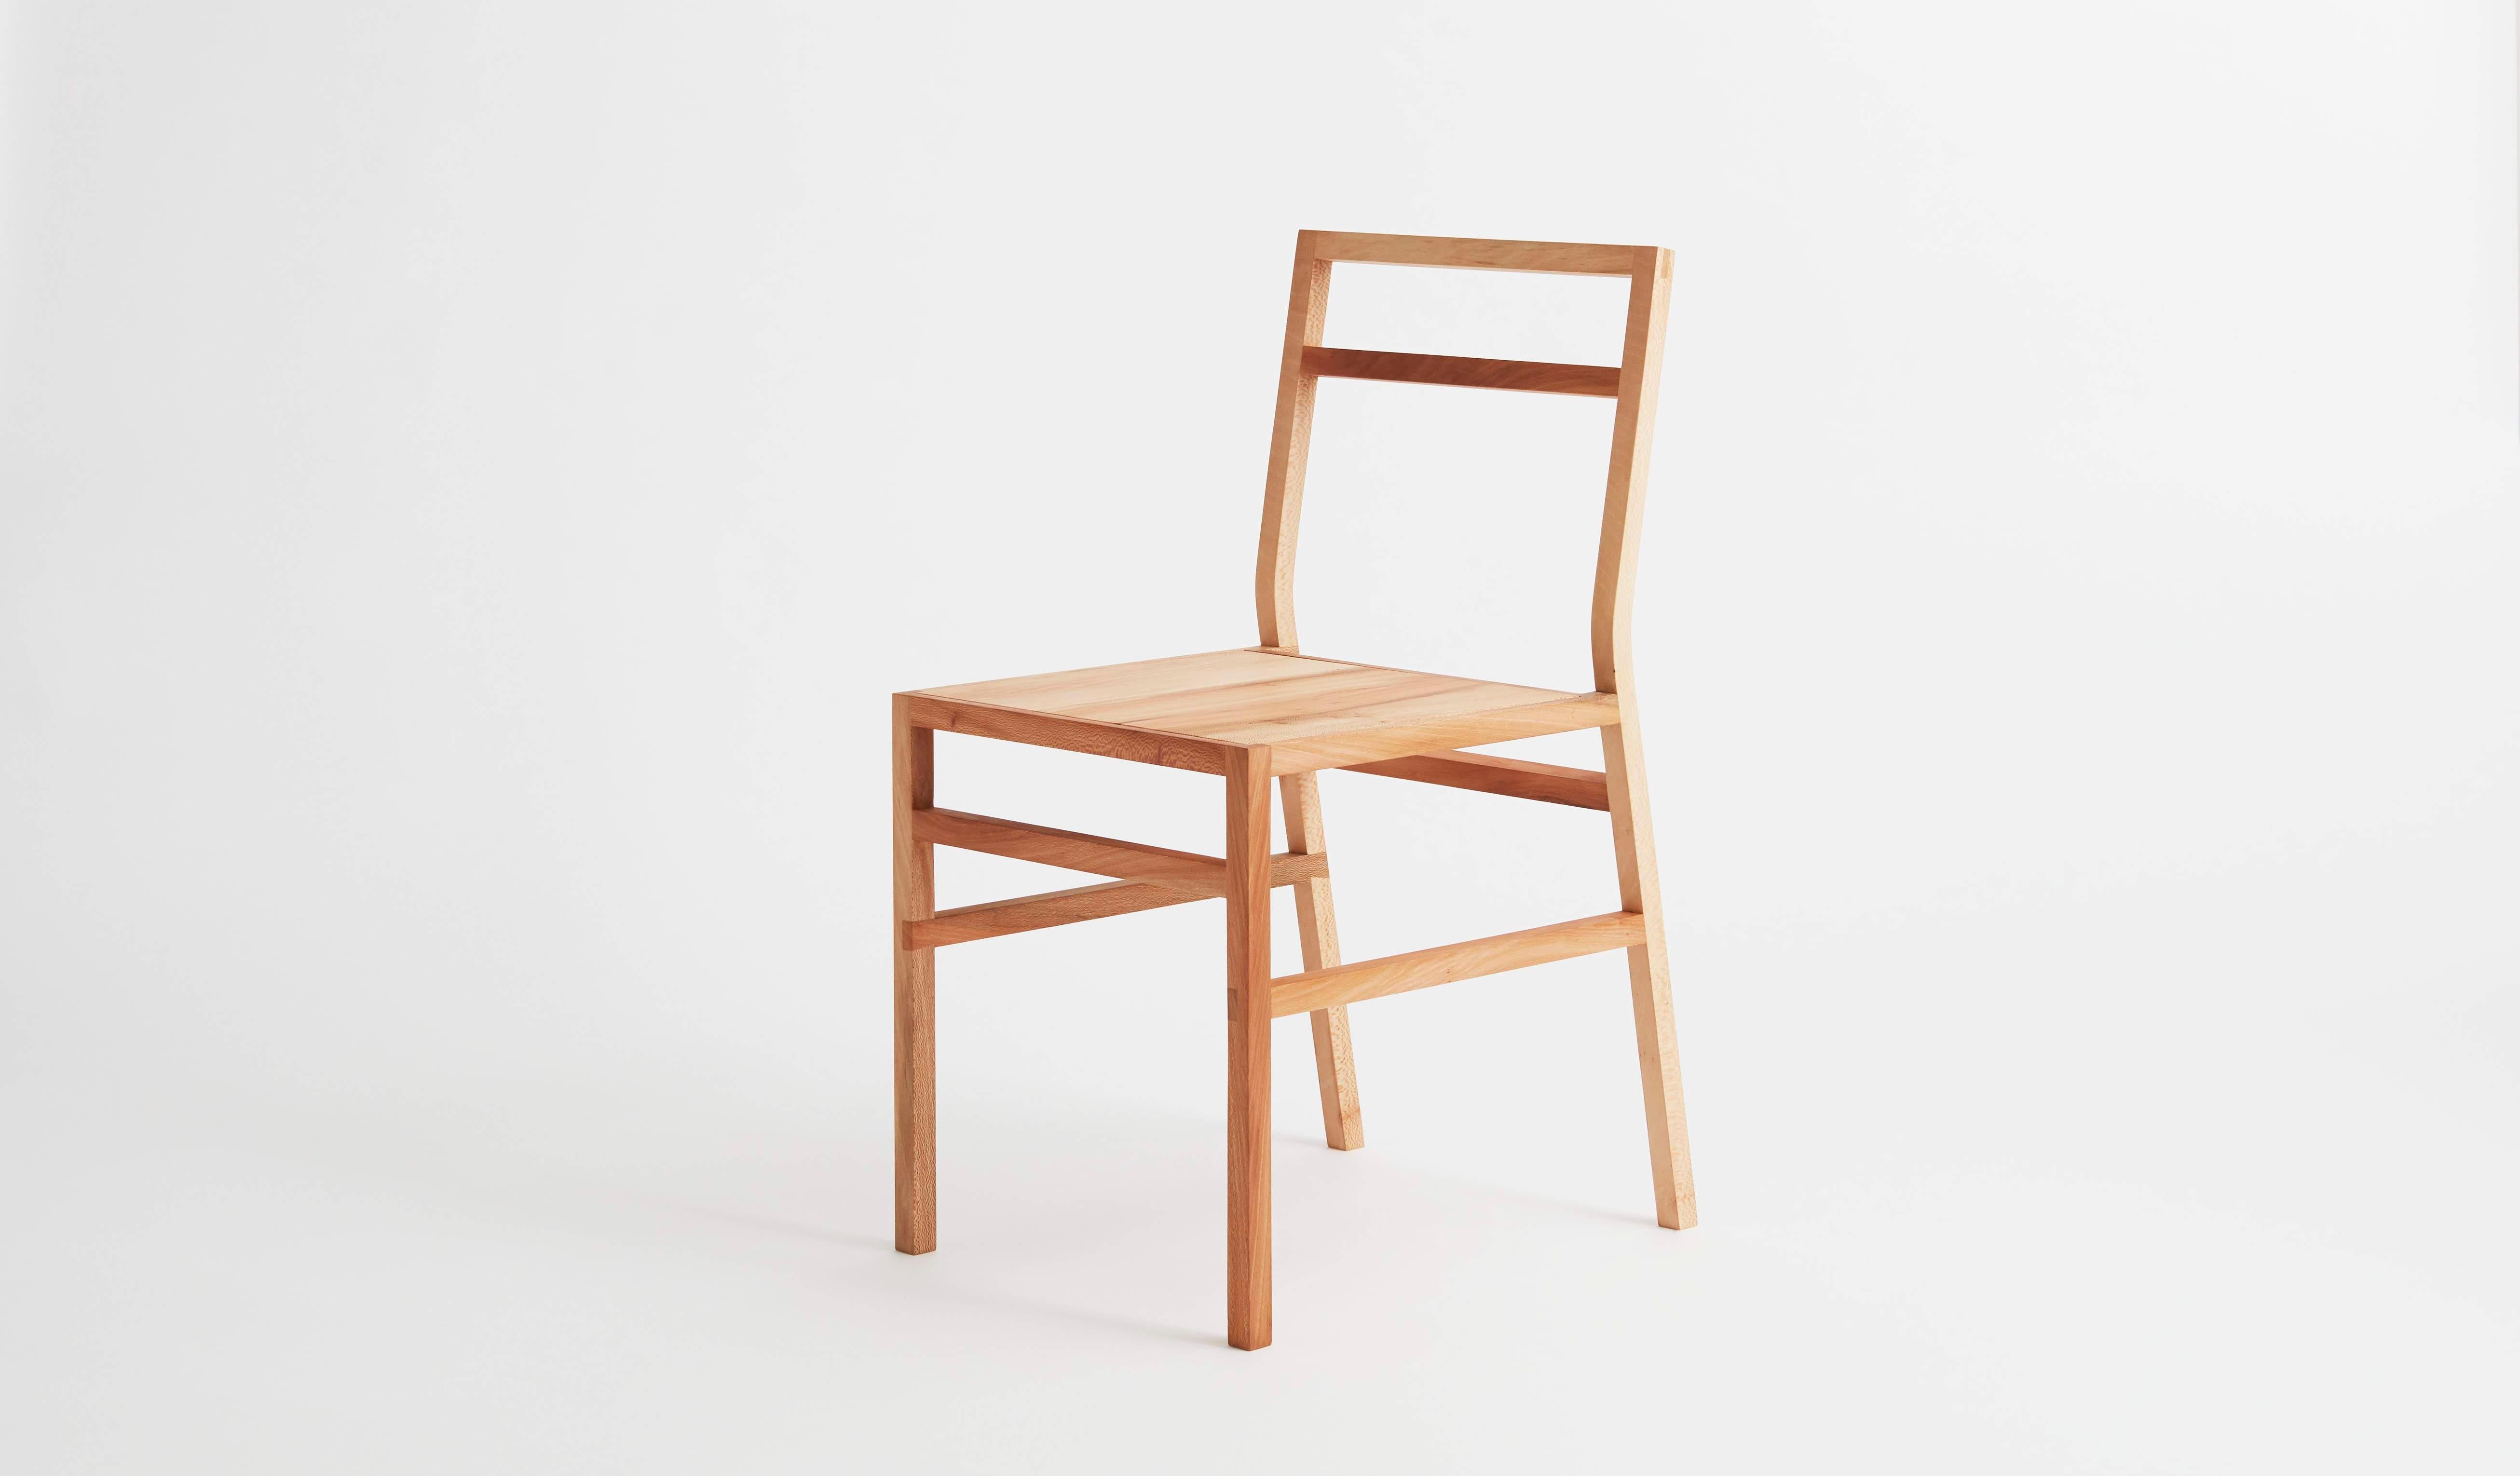 Hardwood Organic Modern Dining Chair, Solid Wood, London Plane, Handmade by Loose Fit, UK For Sale